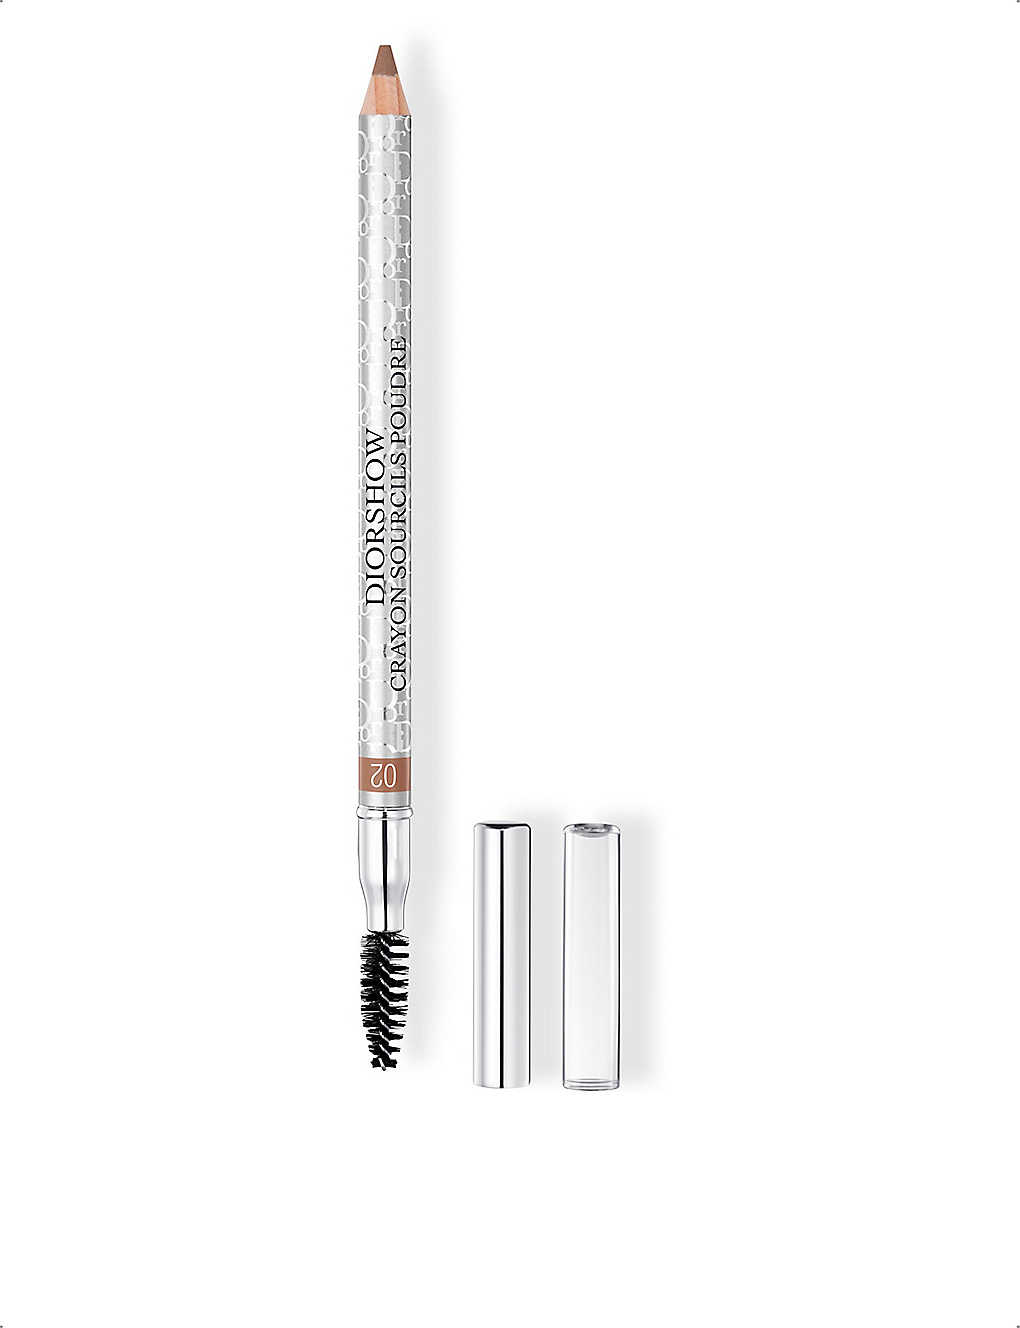 Dior Show Crayon Sourcils Poudre Eyebrow Pencil 0.2g In 02 - Chesnut